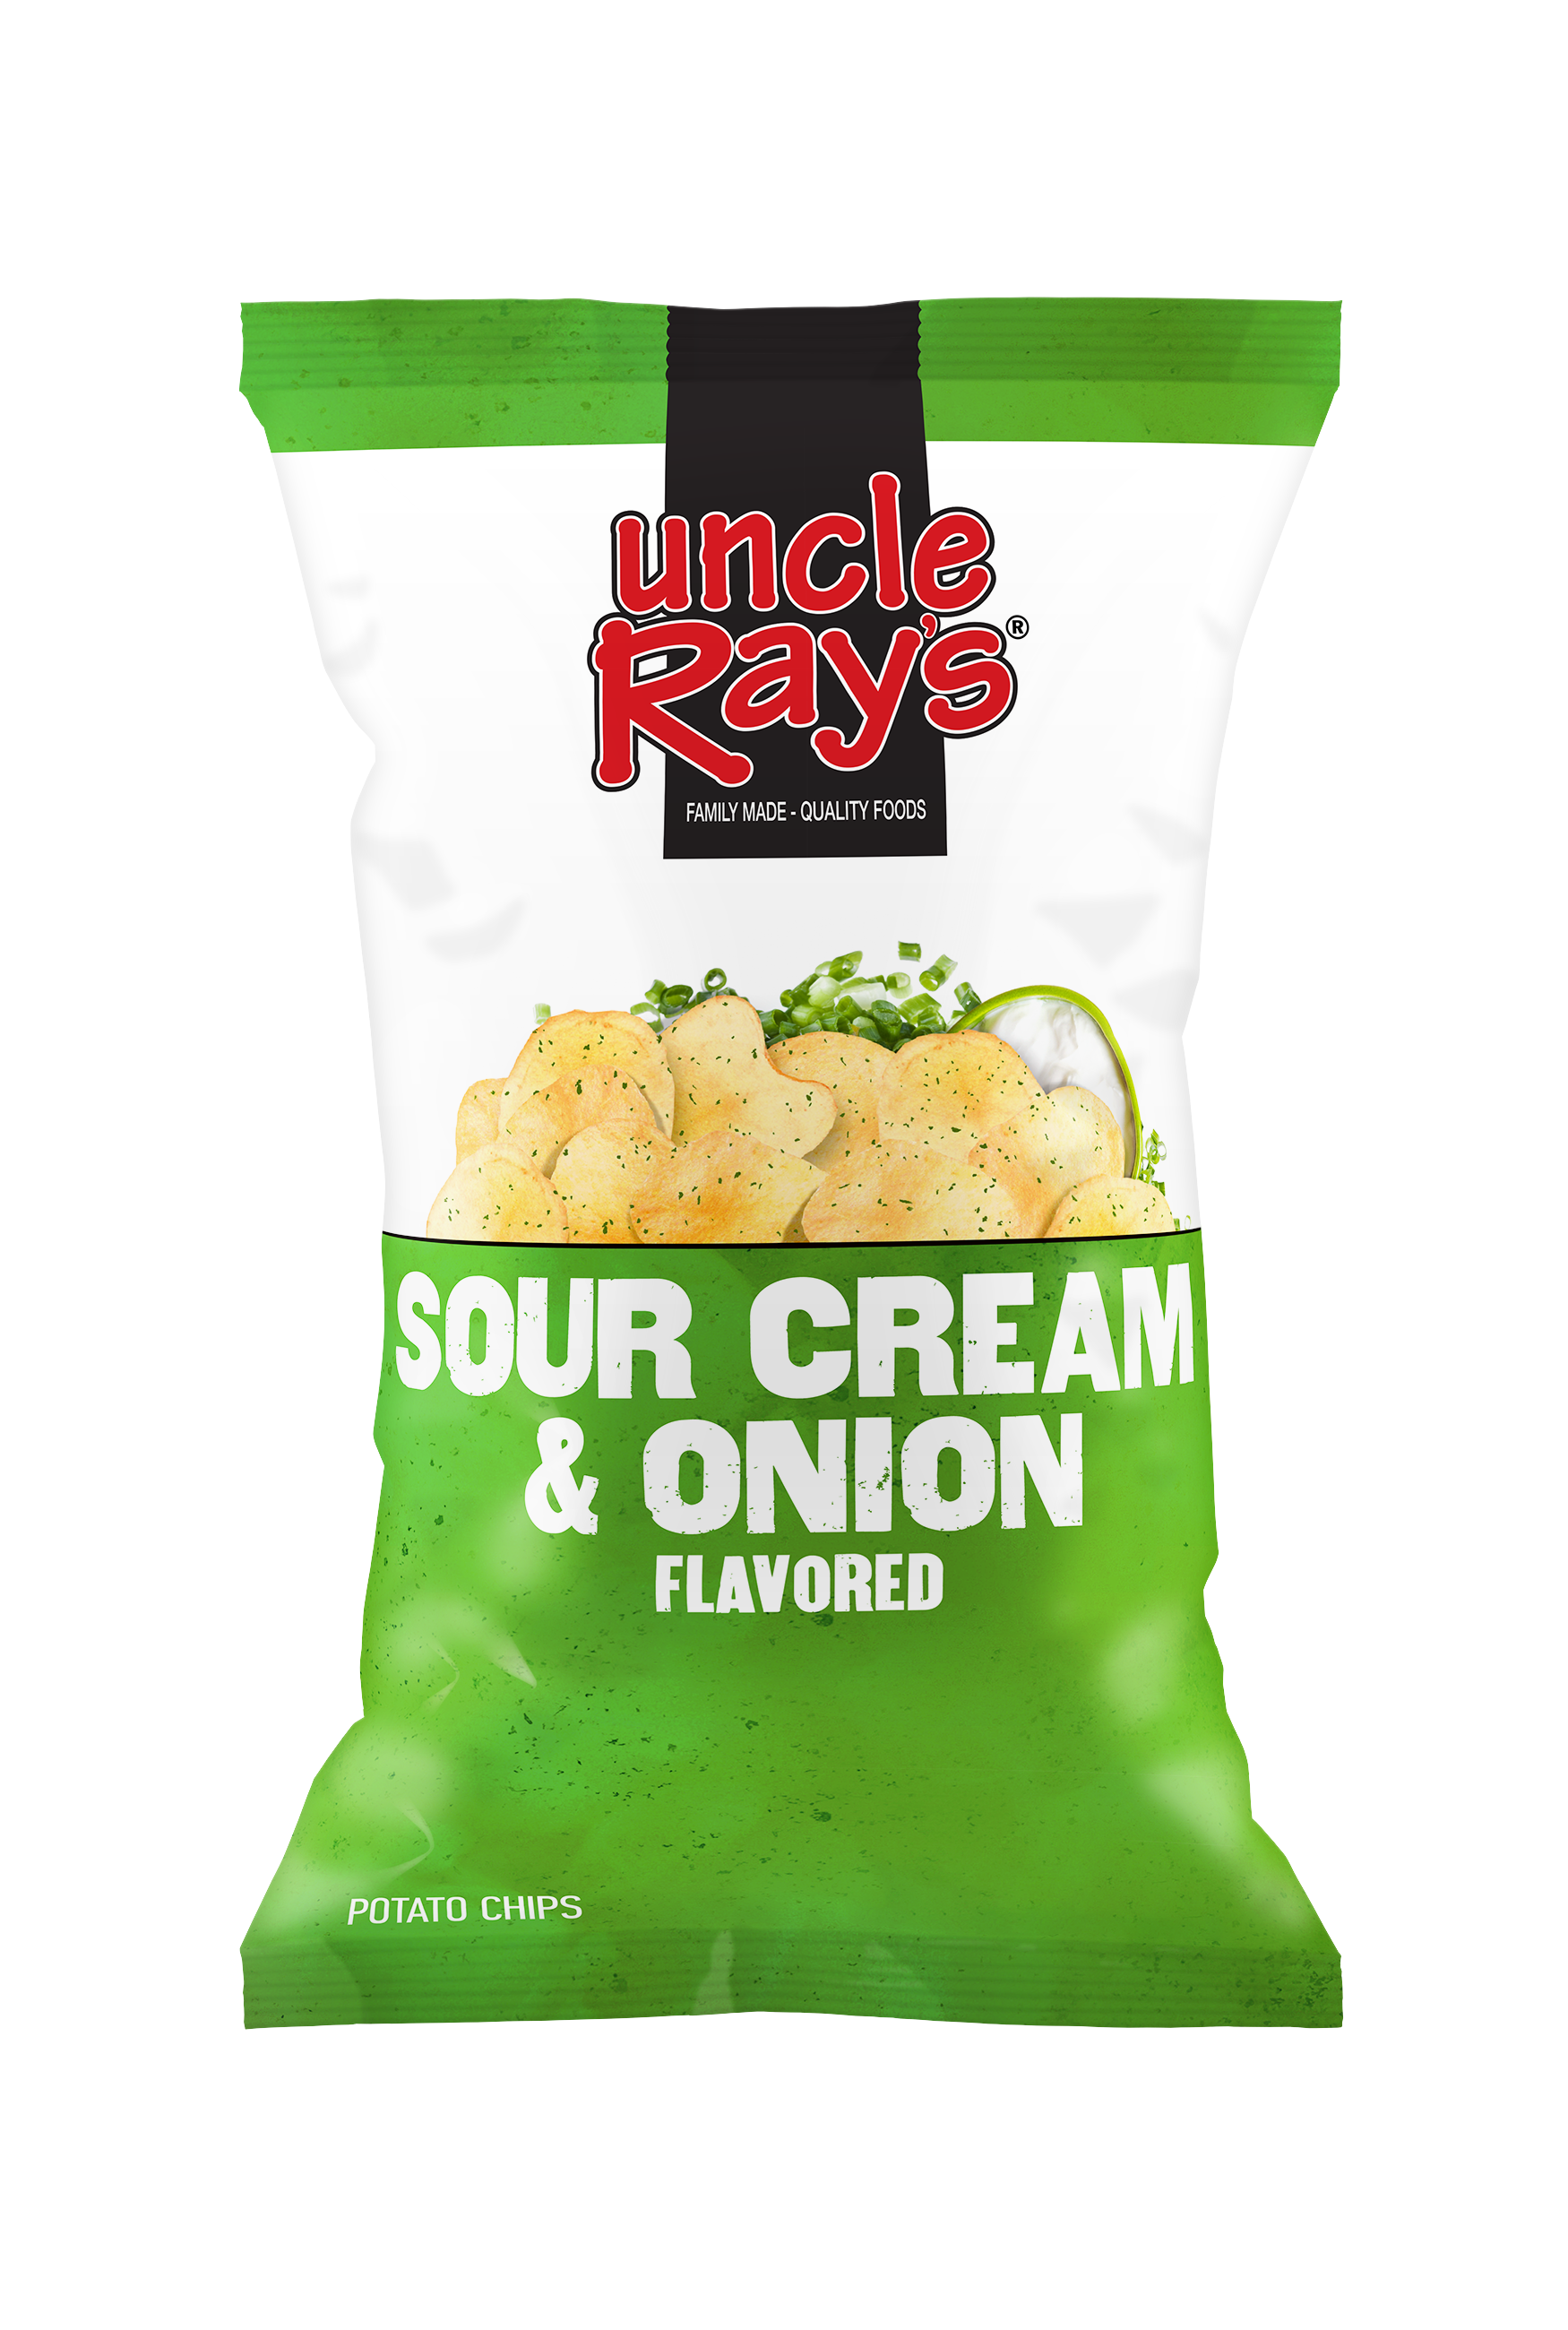 Uncle rays sour cream and onion chips 3oz